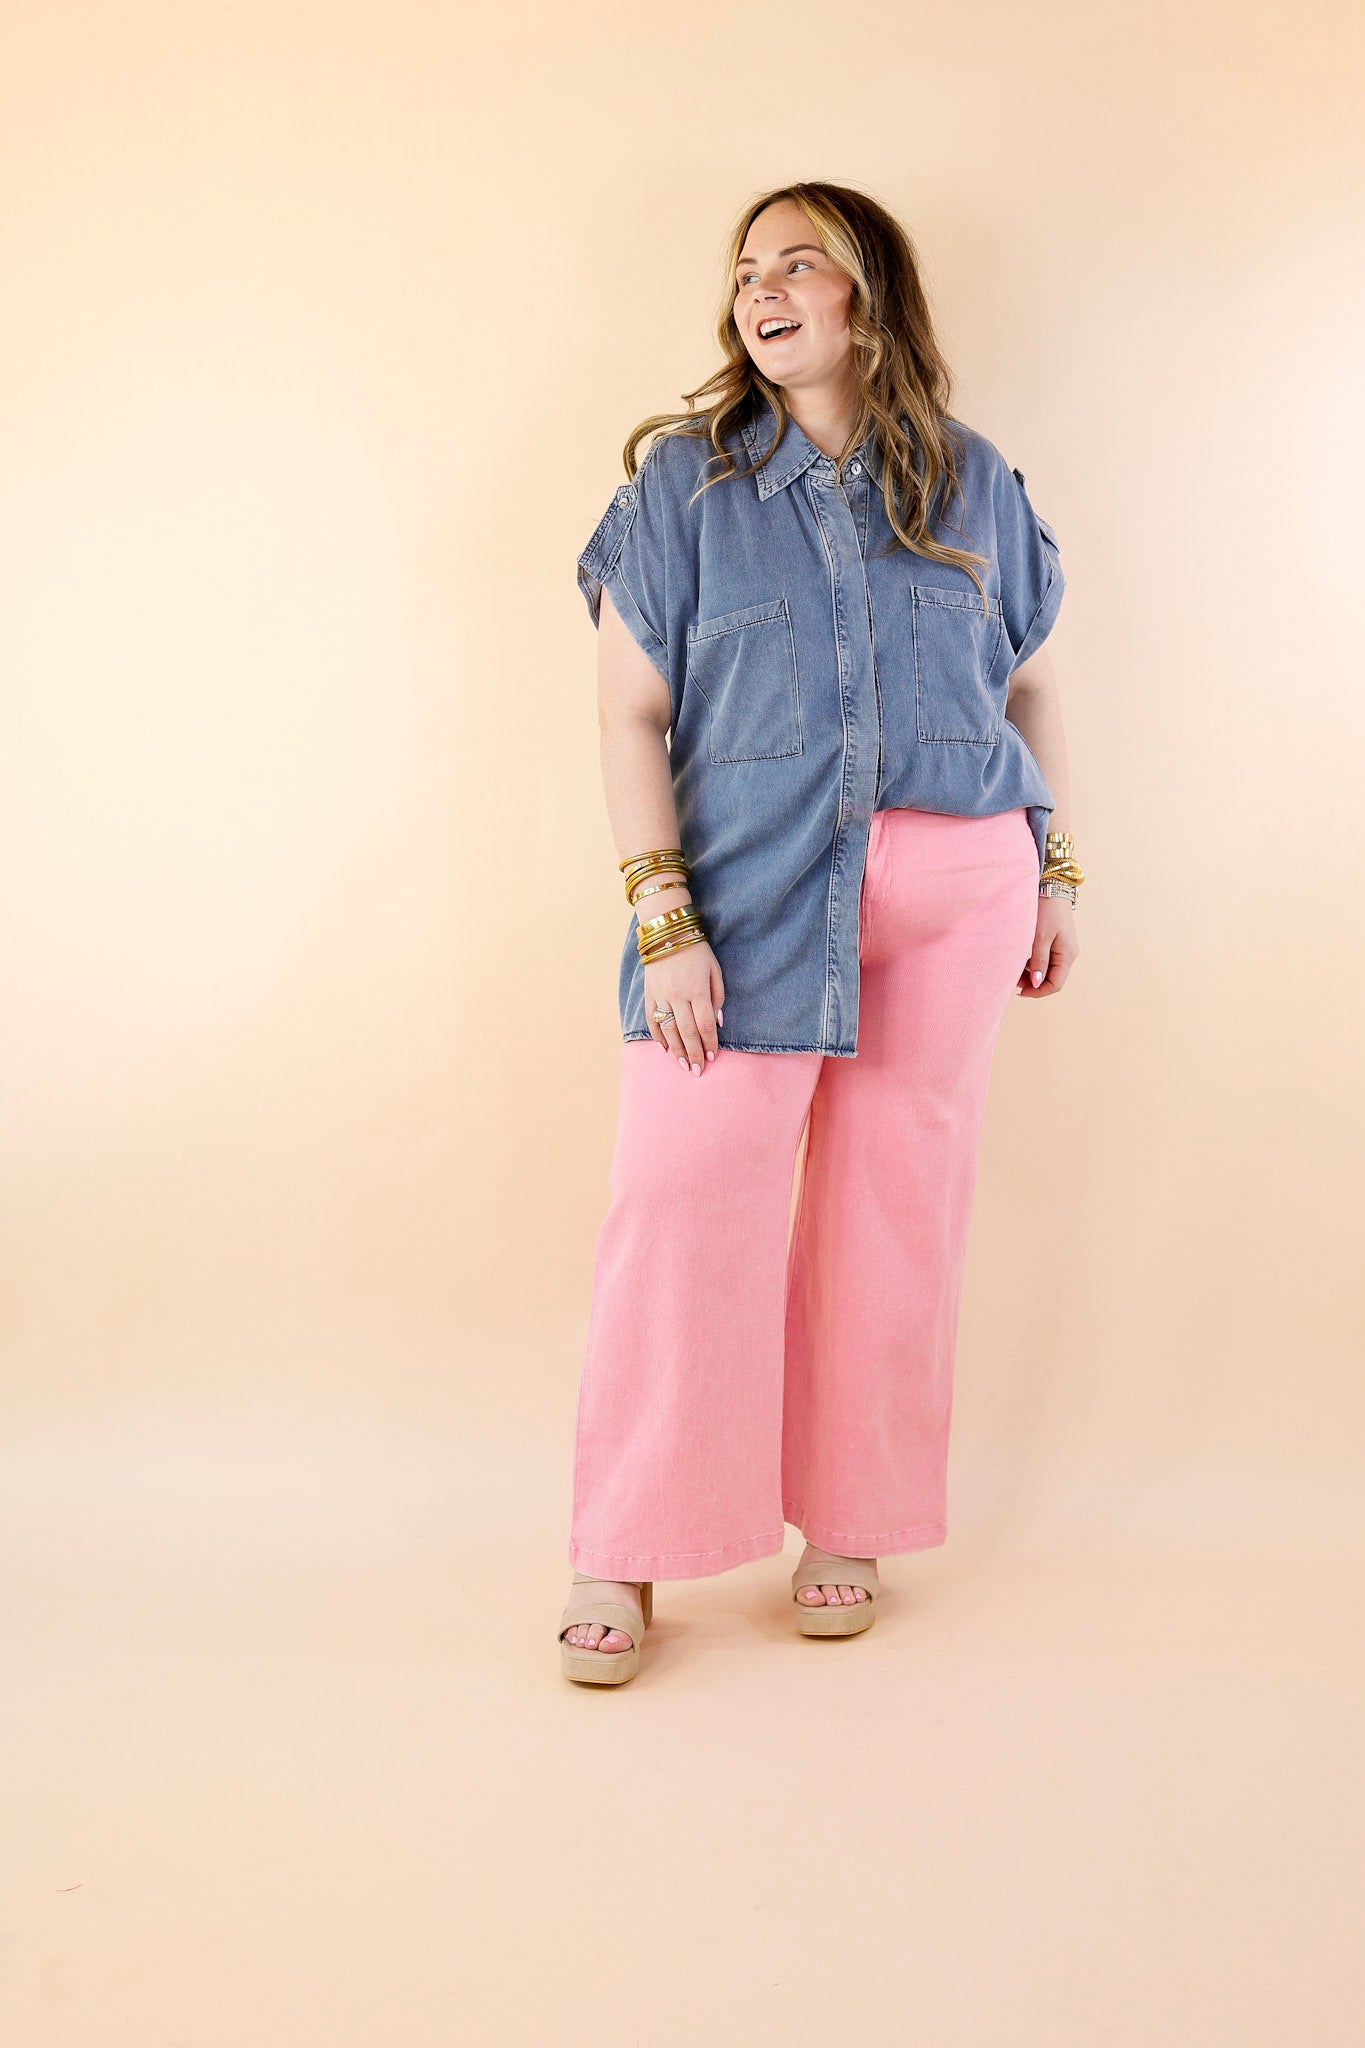 Fast Forward Denim Hidden Button Up Top with Short Sleeves in Medium Wash - Giddy Up Glamour Boutique